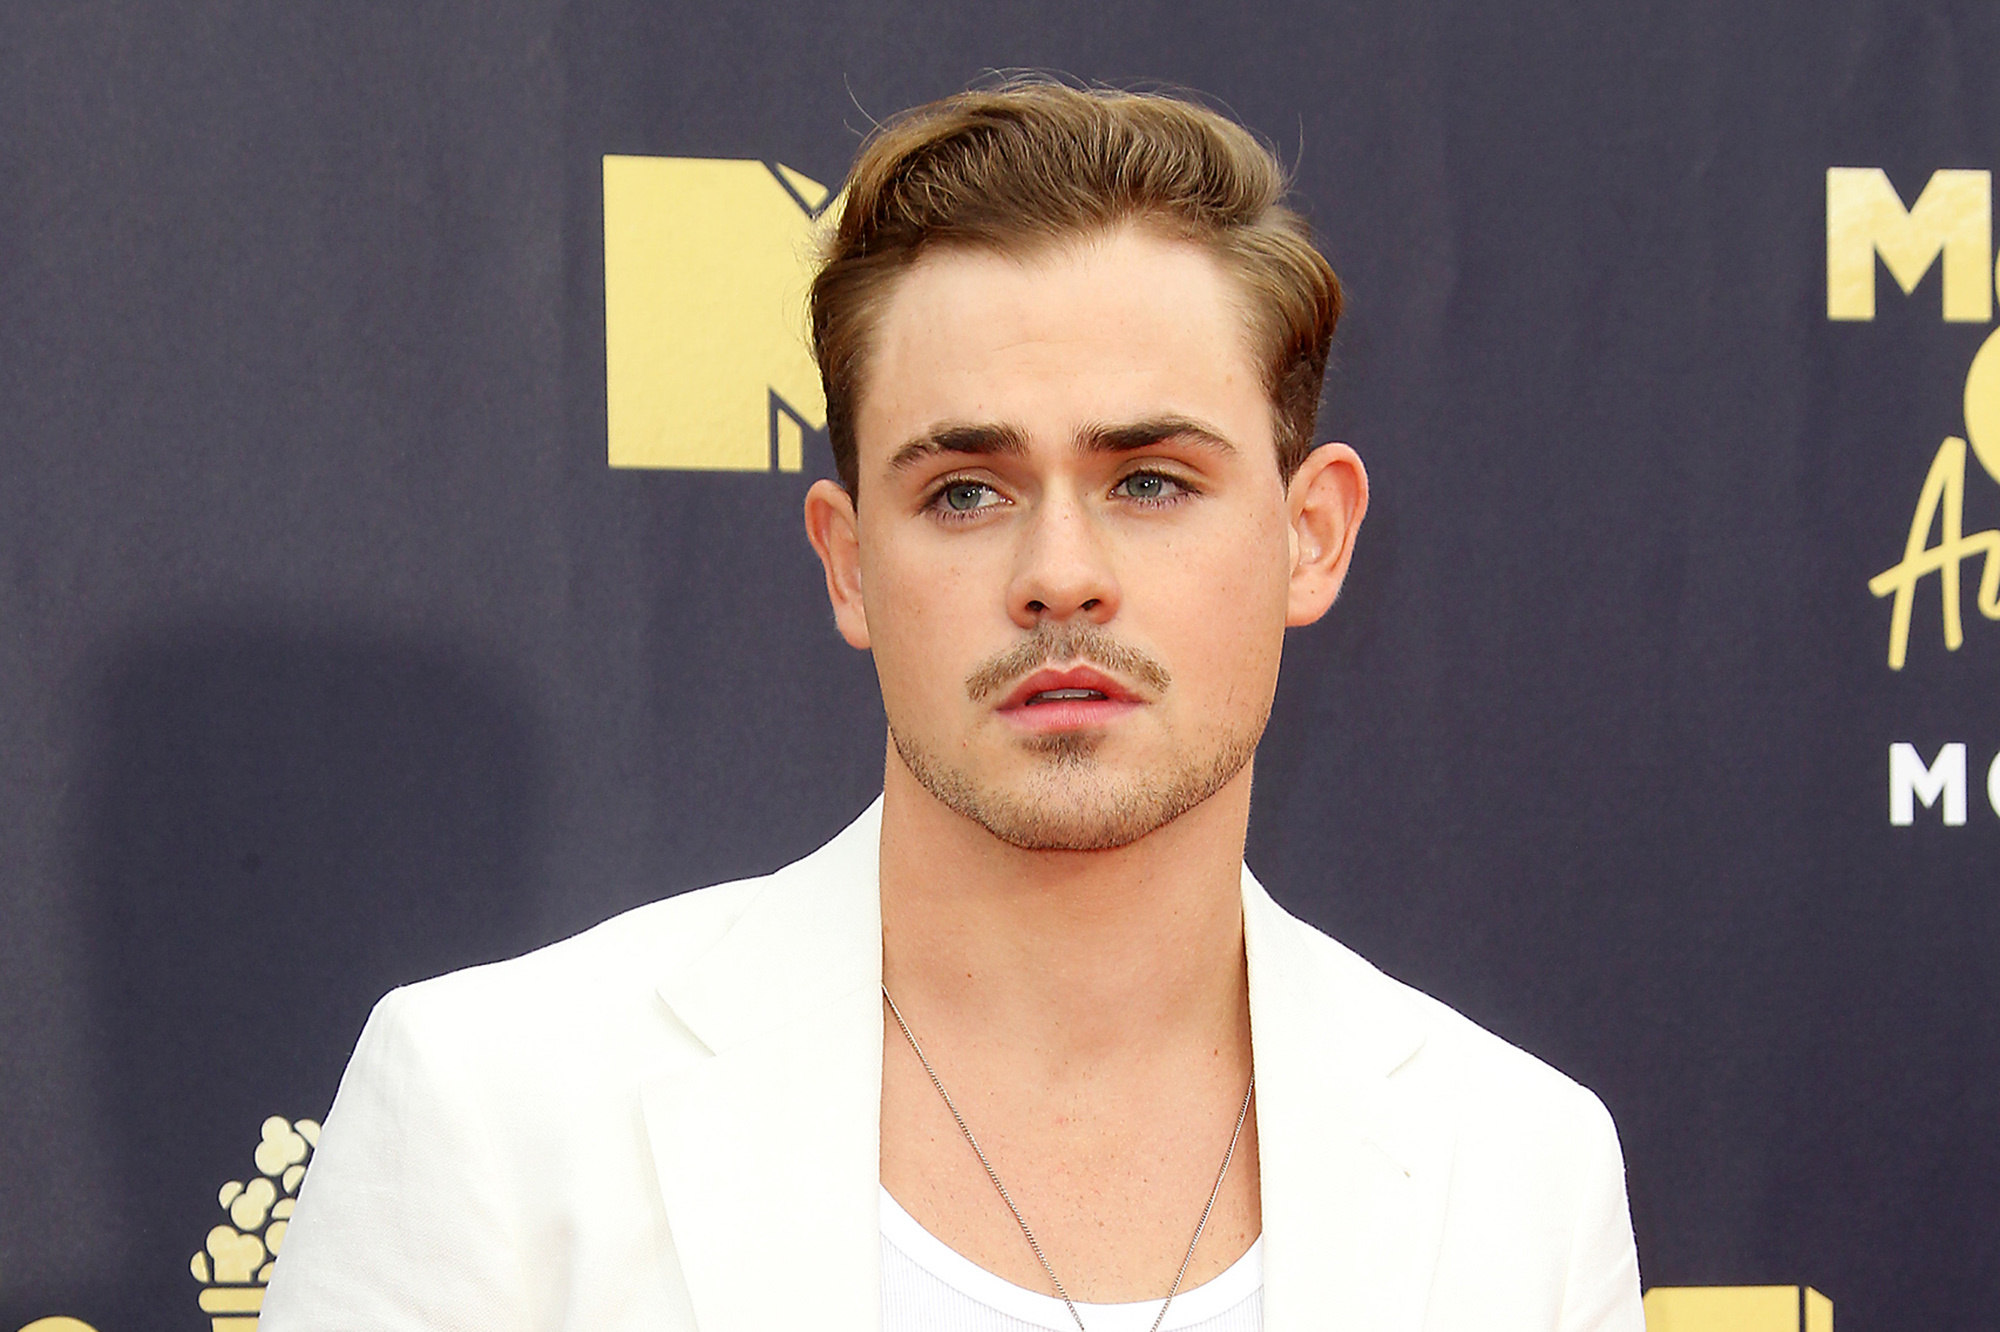 Dacre Montgomery TV shows, Stranger Things actor, Rising star, Hollywood career, 2000x1340 HD Desktop